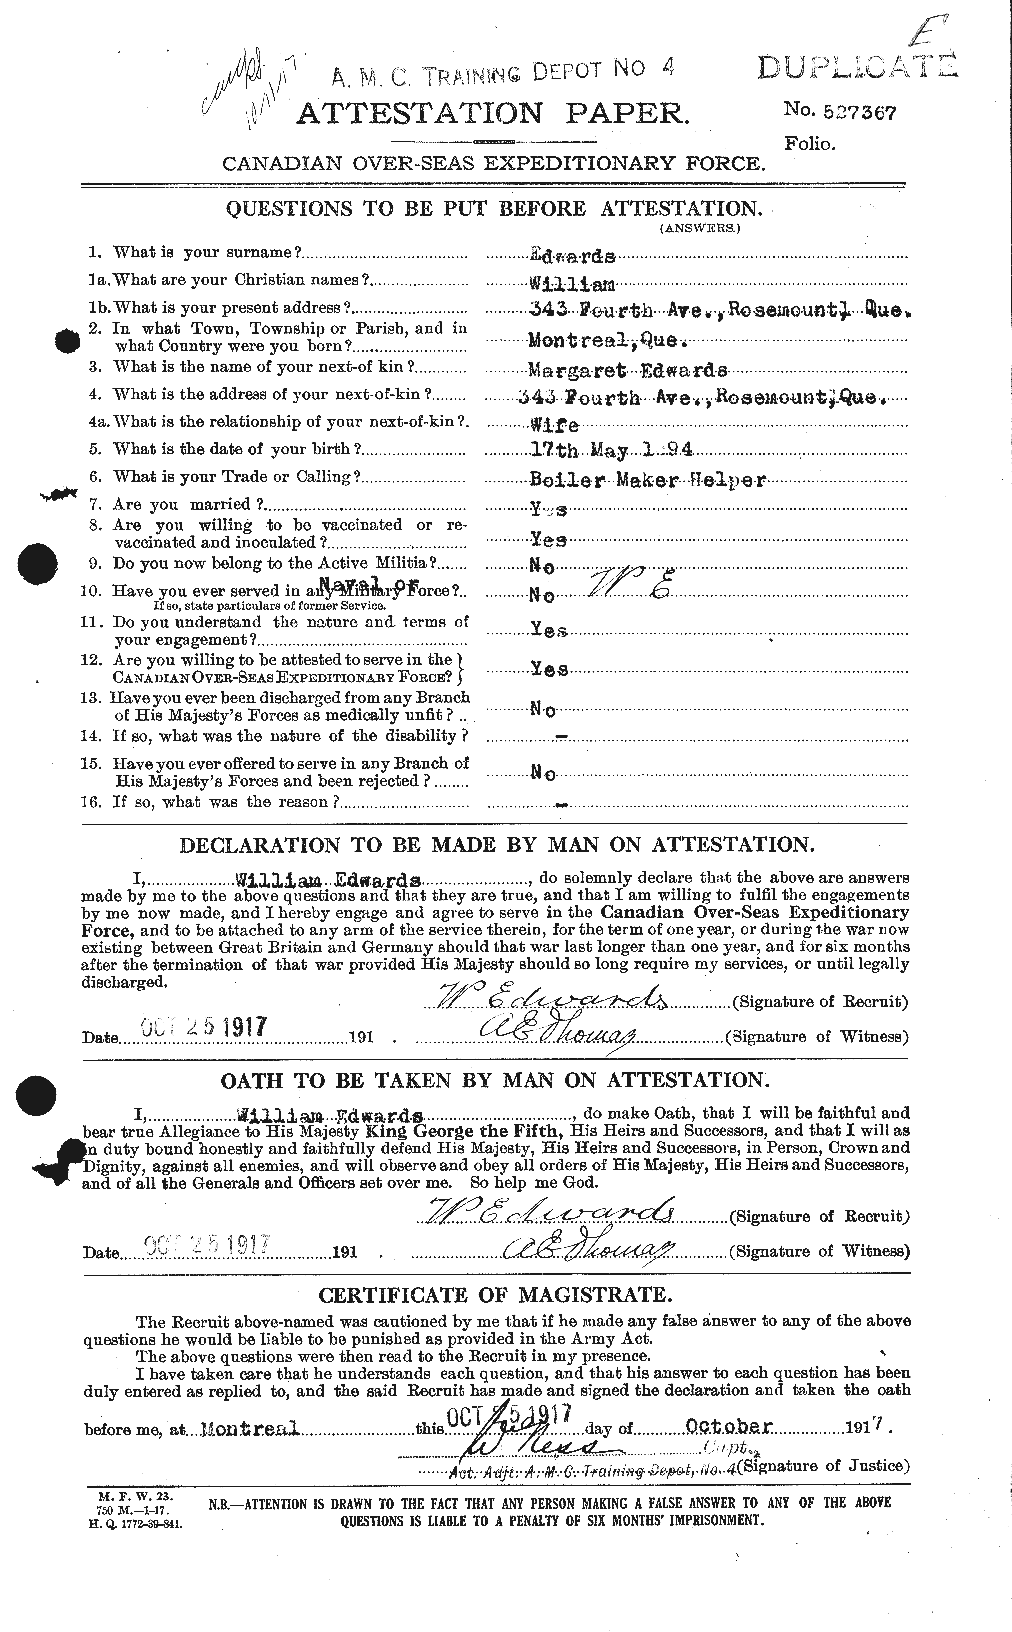 Personnel Records of the First World War - CEF 310389a